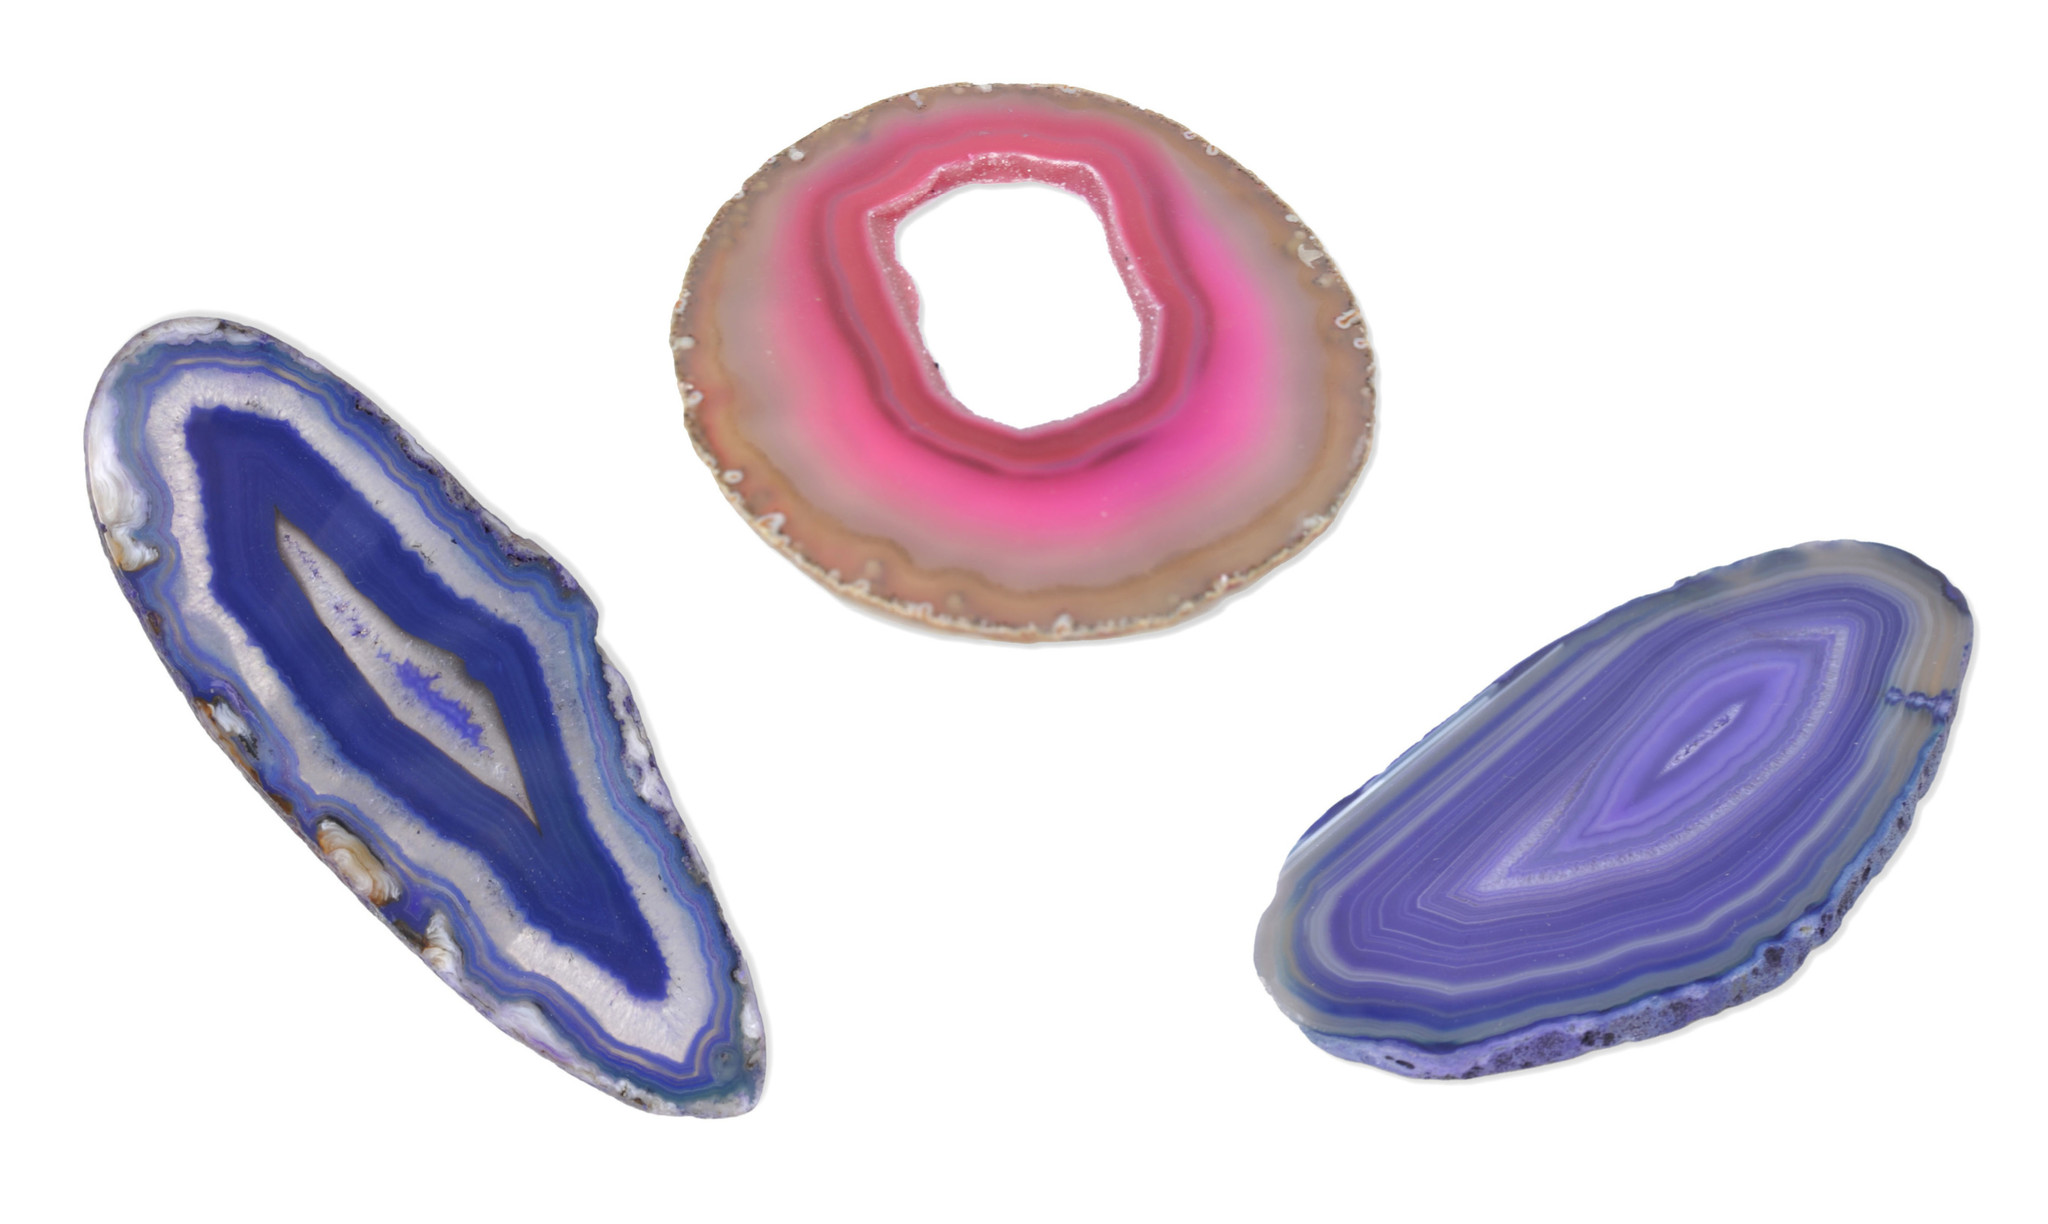 3 pieces of agate slices; 2 pieces are purple and one is fushia pink. All pieces feature unique circular waves and patterns